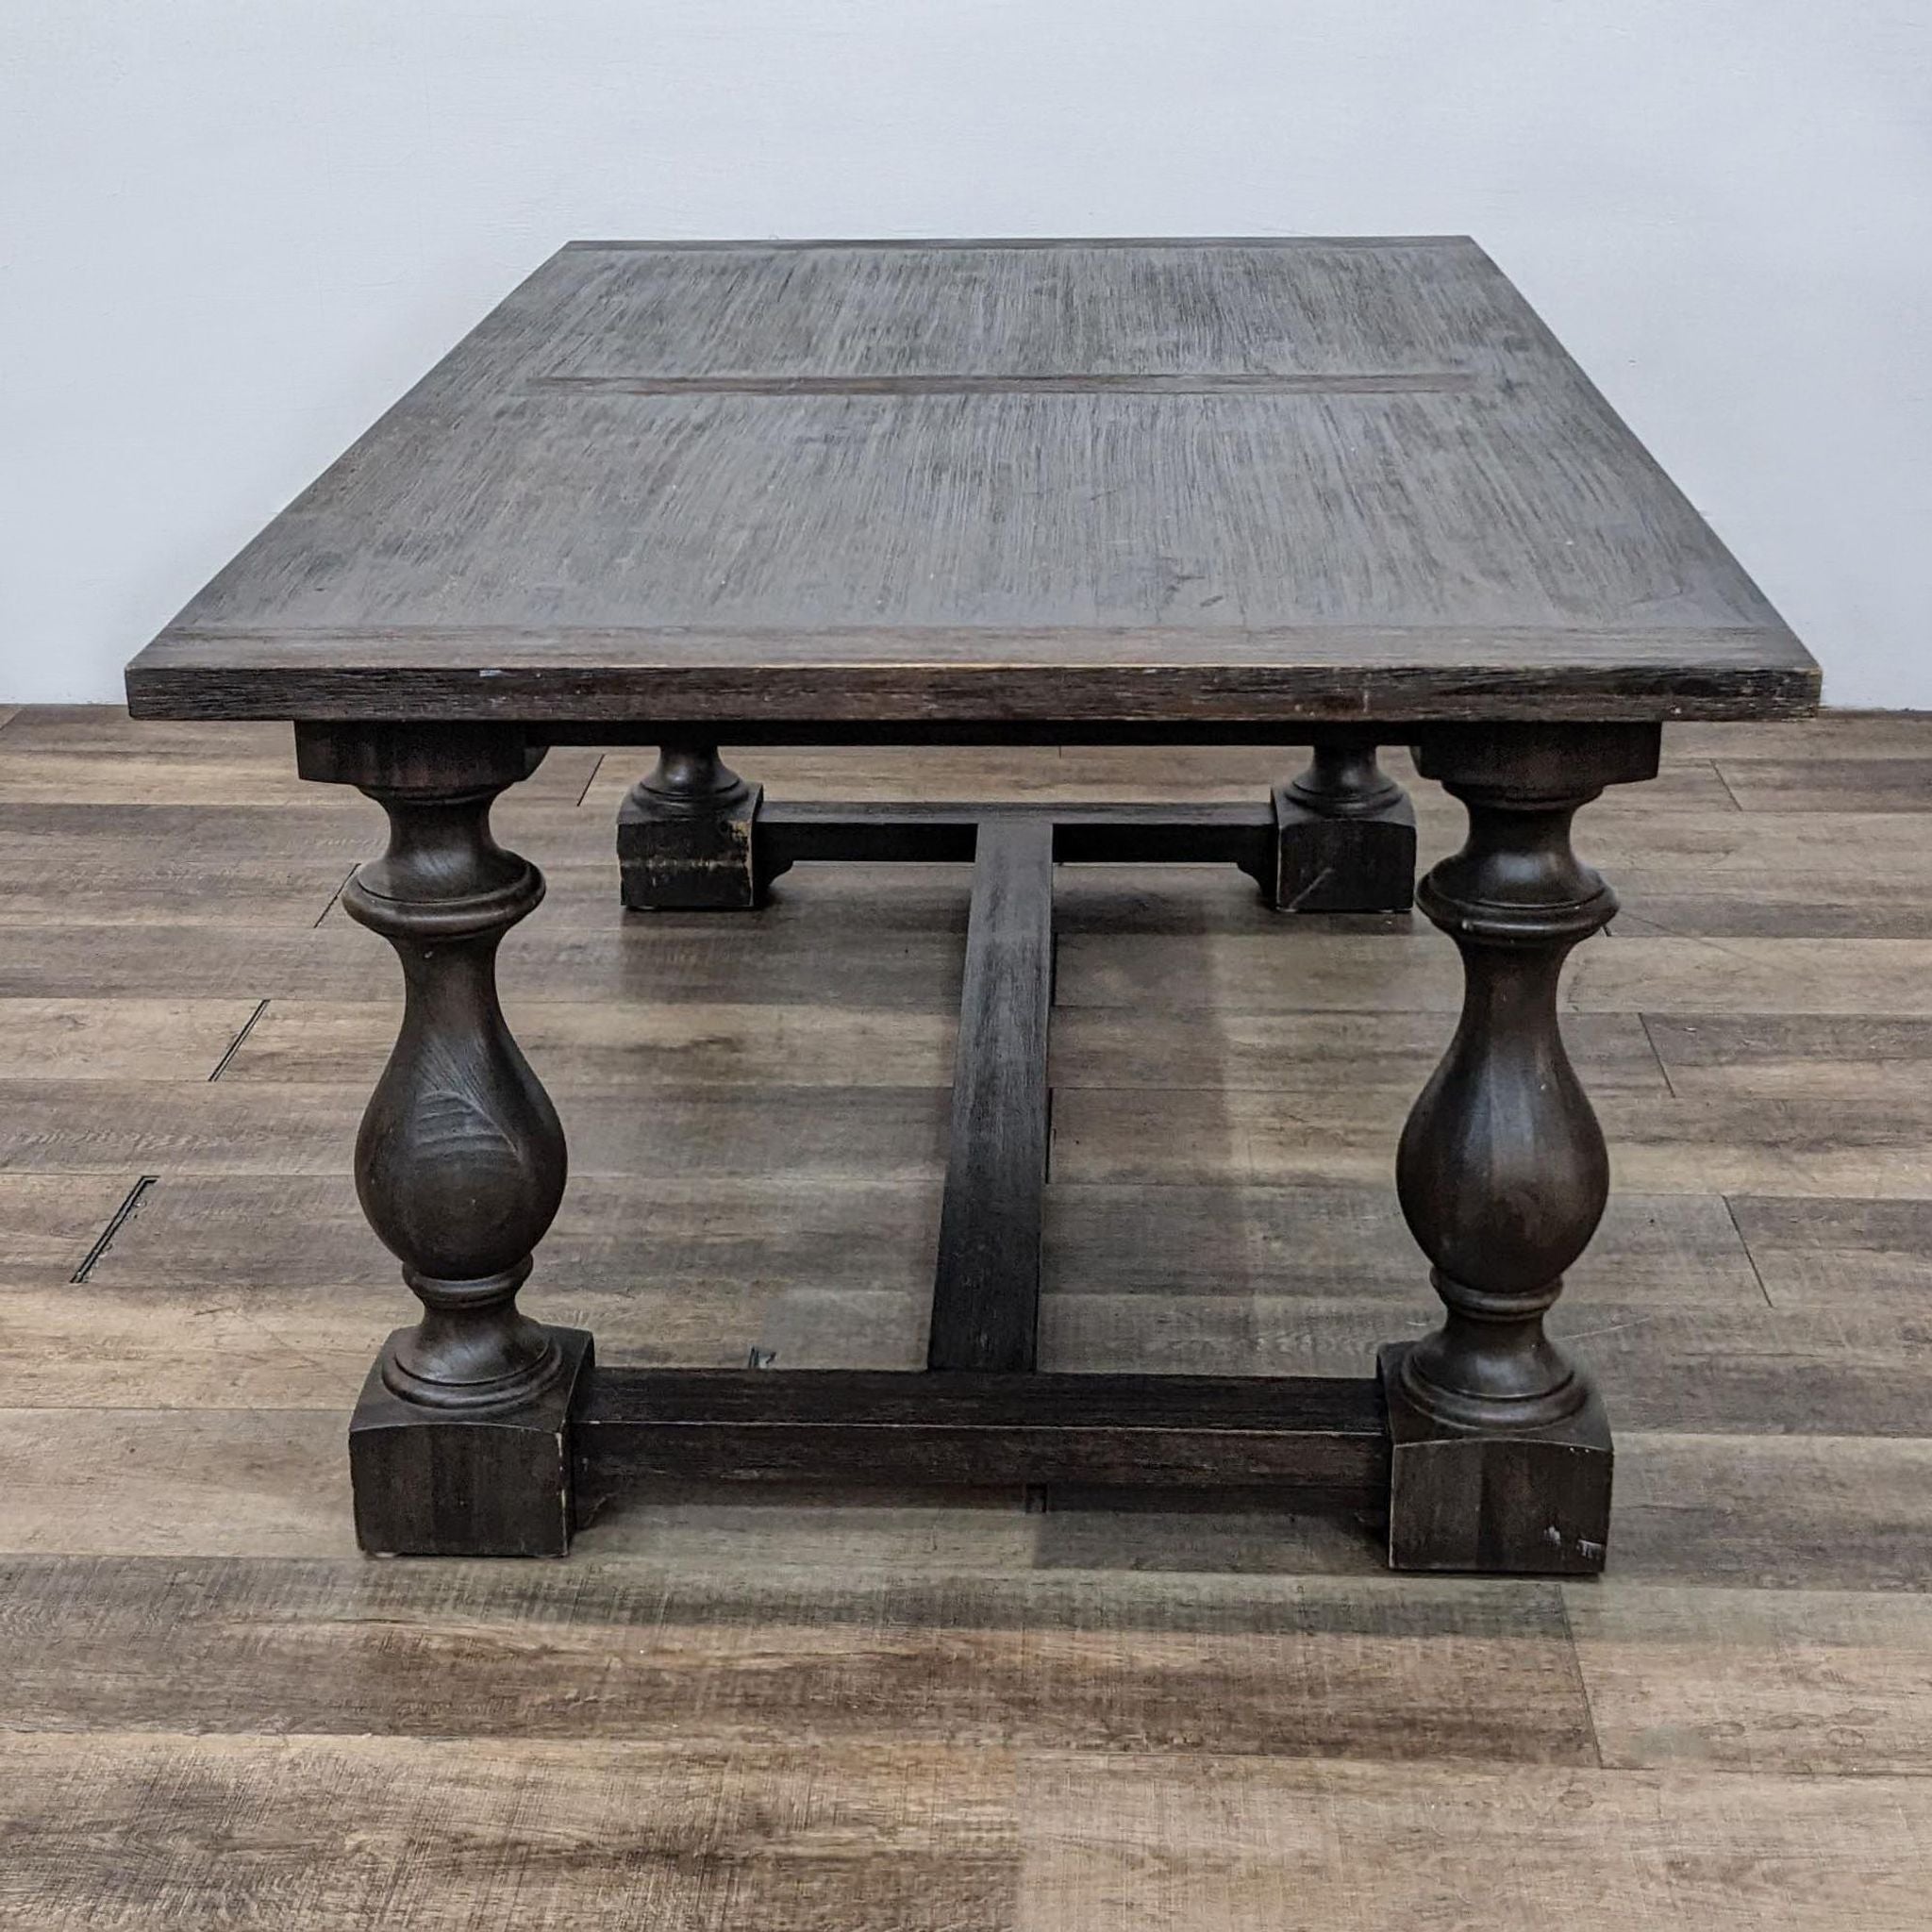 Restoration Hardware traditional dining table featuring acacia, fine veneers, and baluster trestle legs from a 17th-century inspired design.